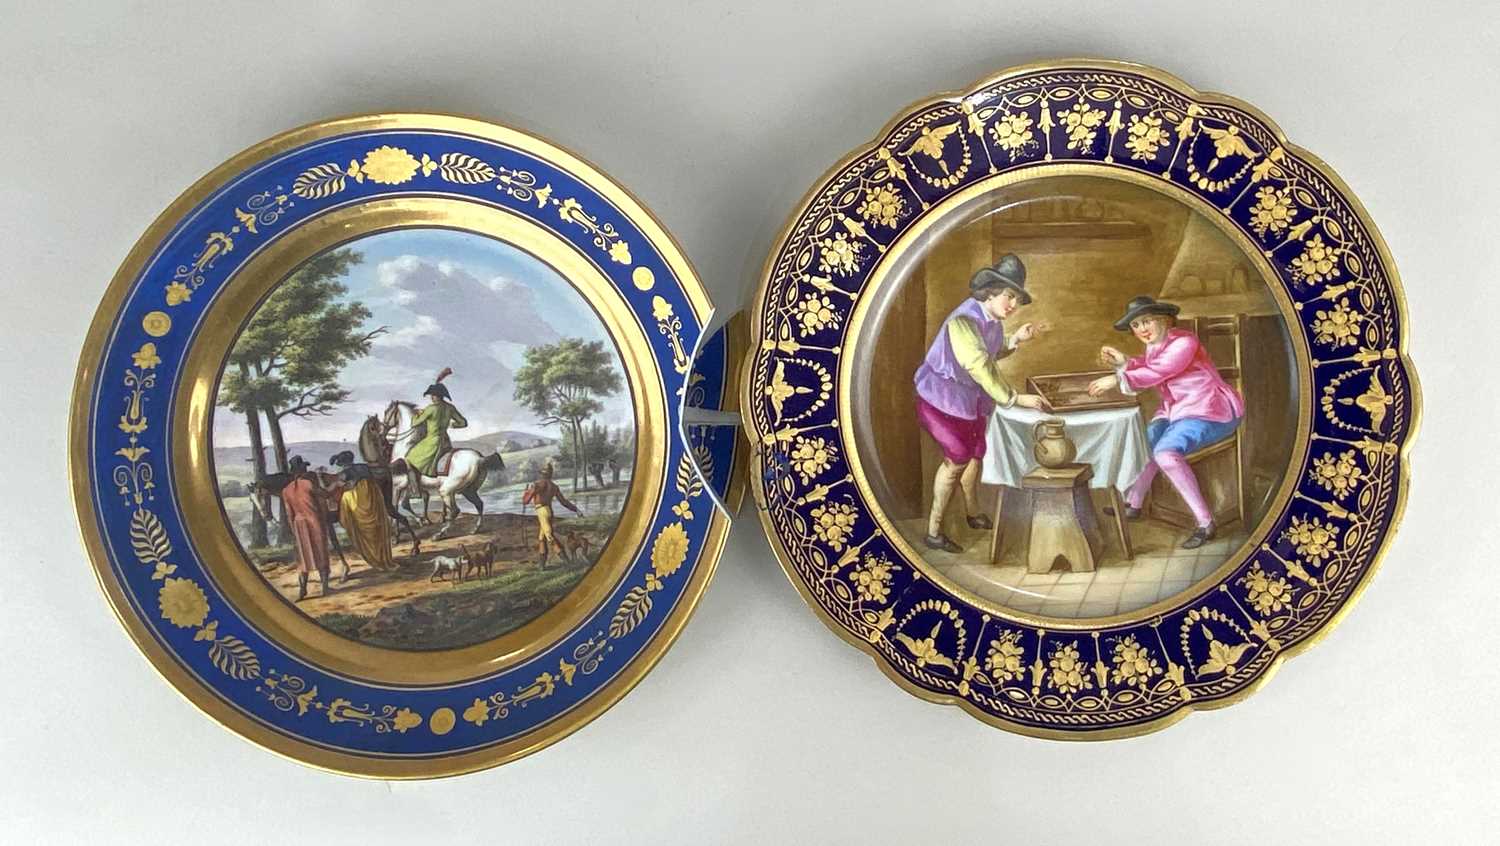 A Sevres porcelain cabinet plate painted with a scene of figures in a tavern, signed, within a